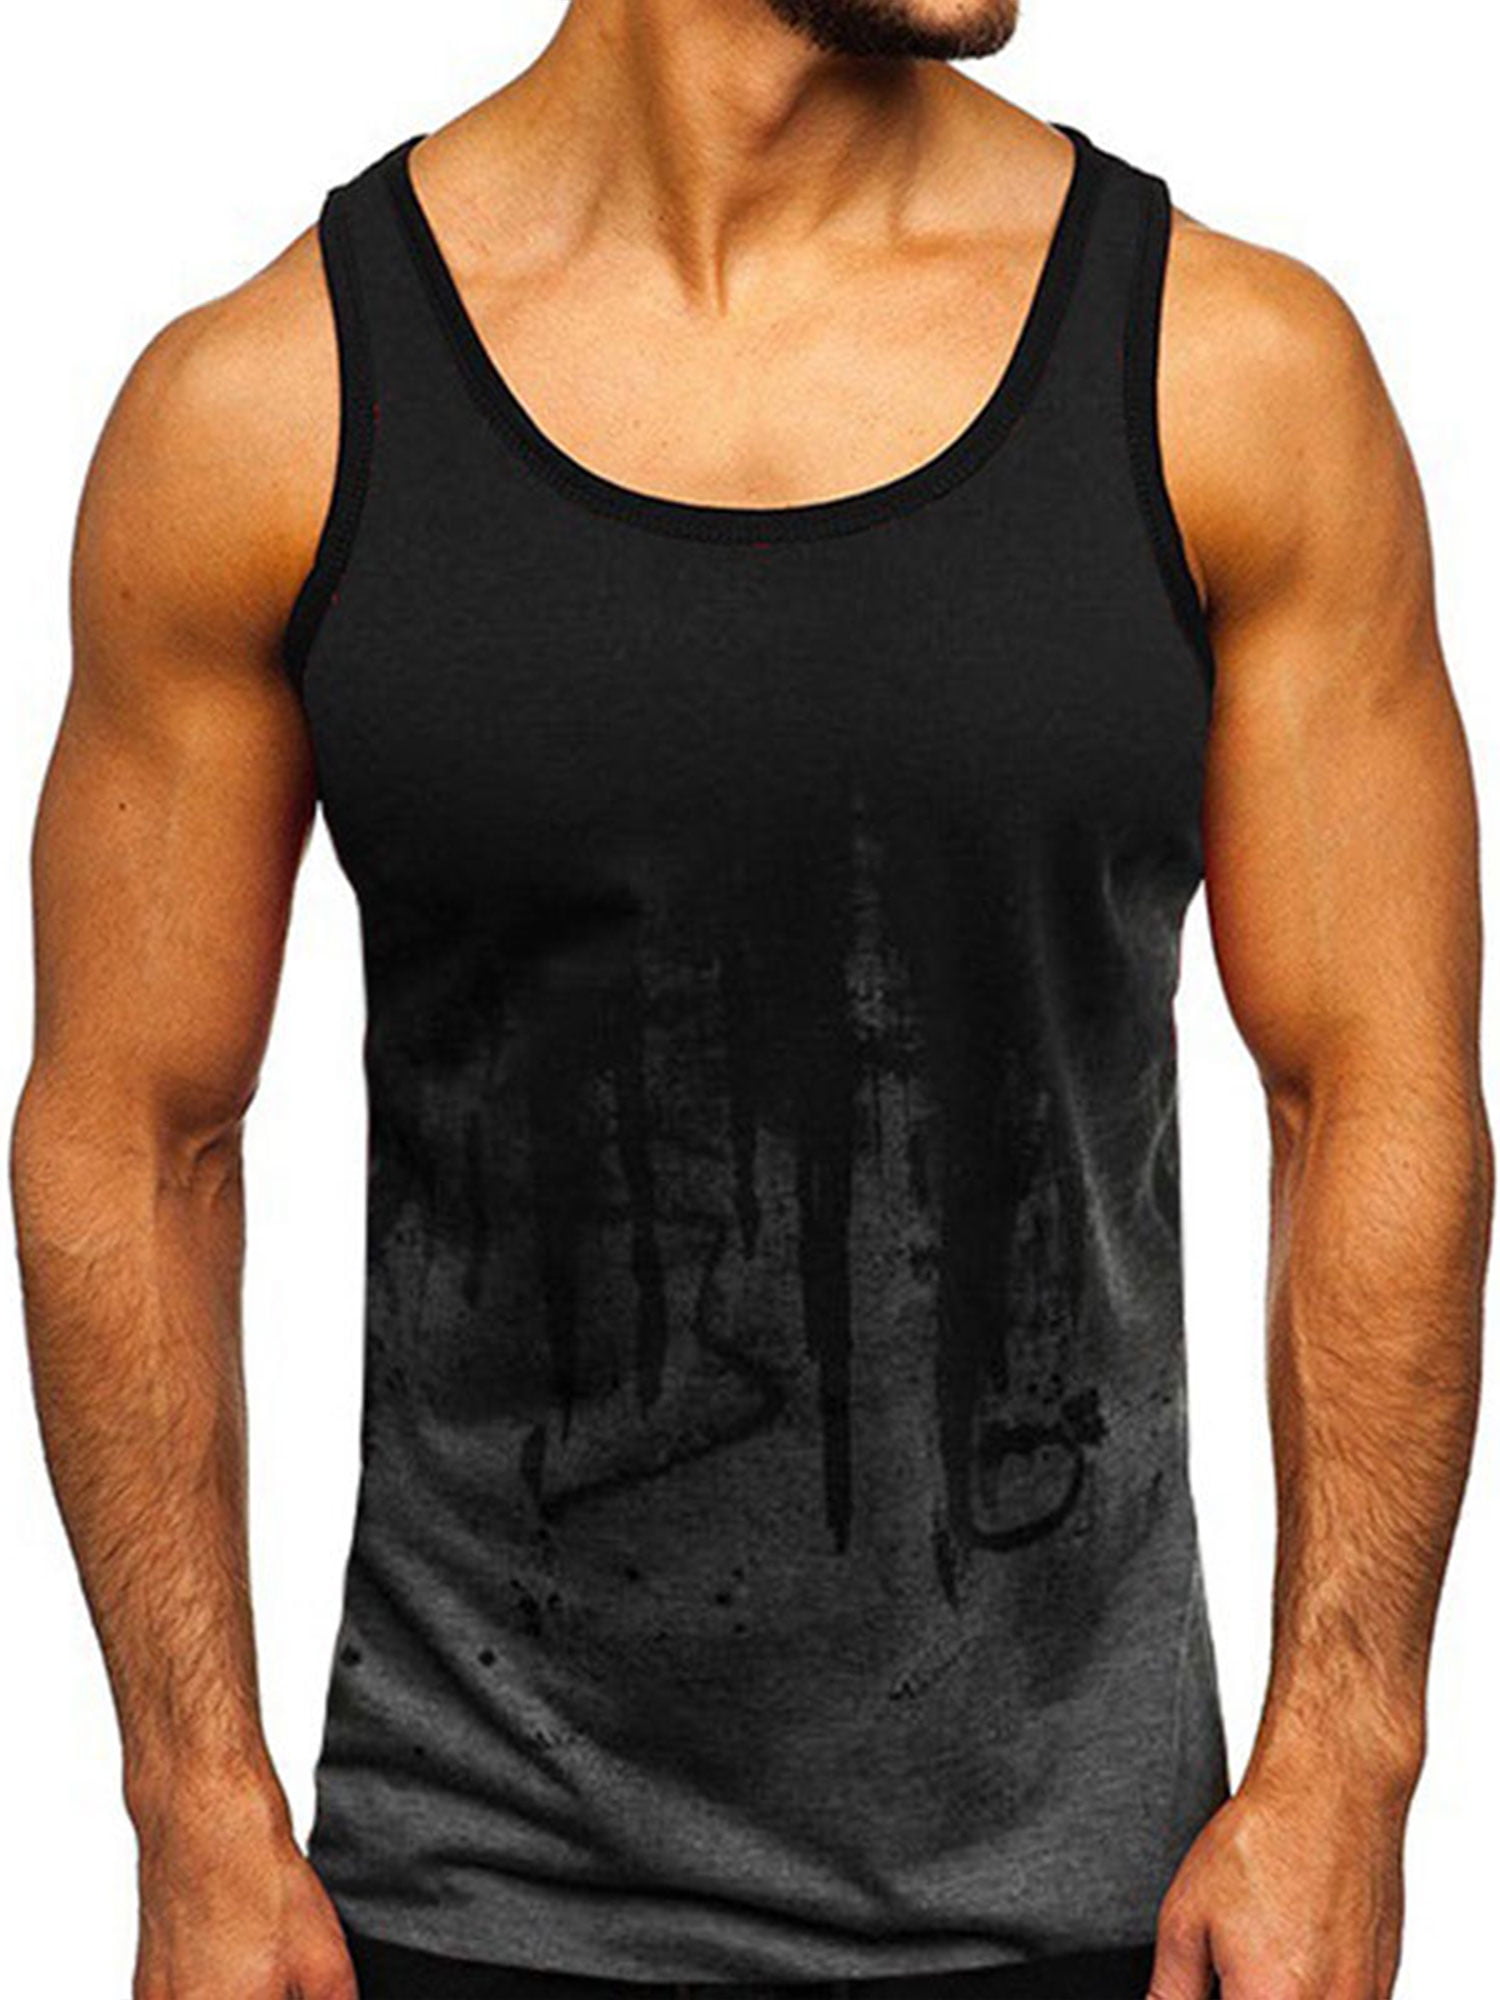 Details about  / Men/'s Muscle T shirt Workout Tank Tops Gym Fitness Sleeveless Hoodies Activewear